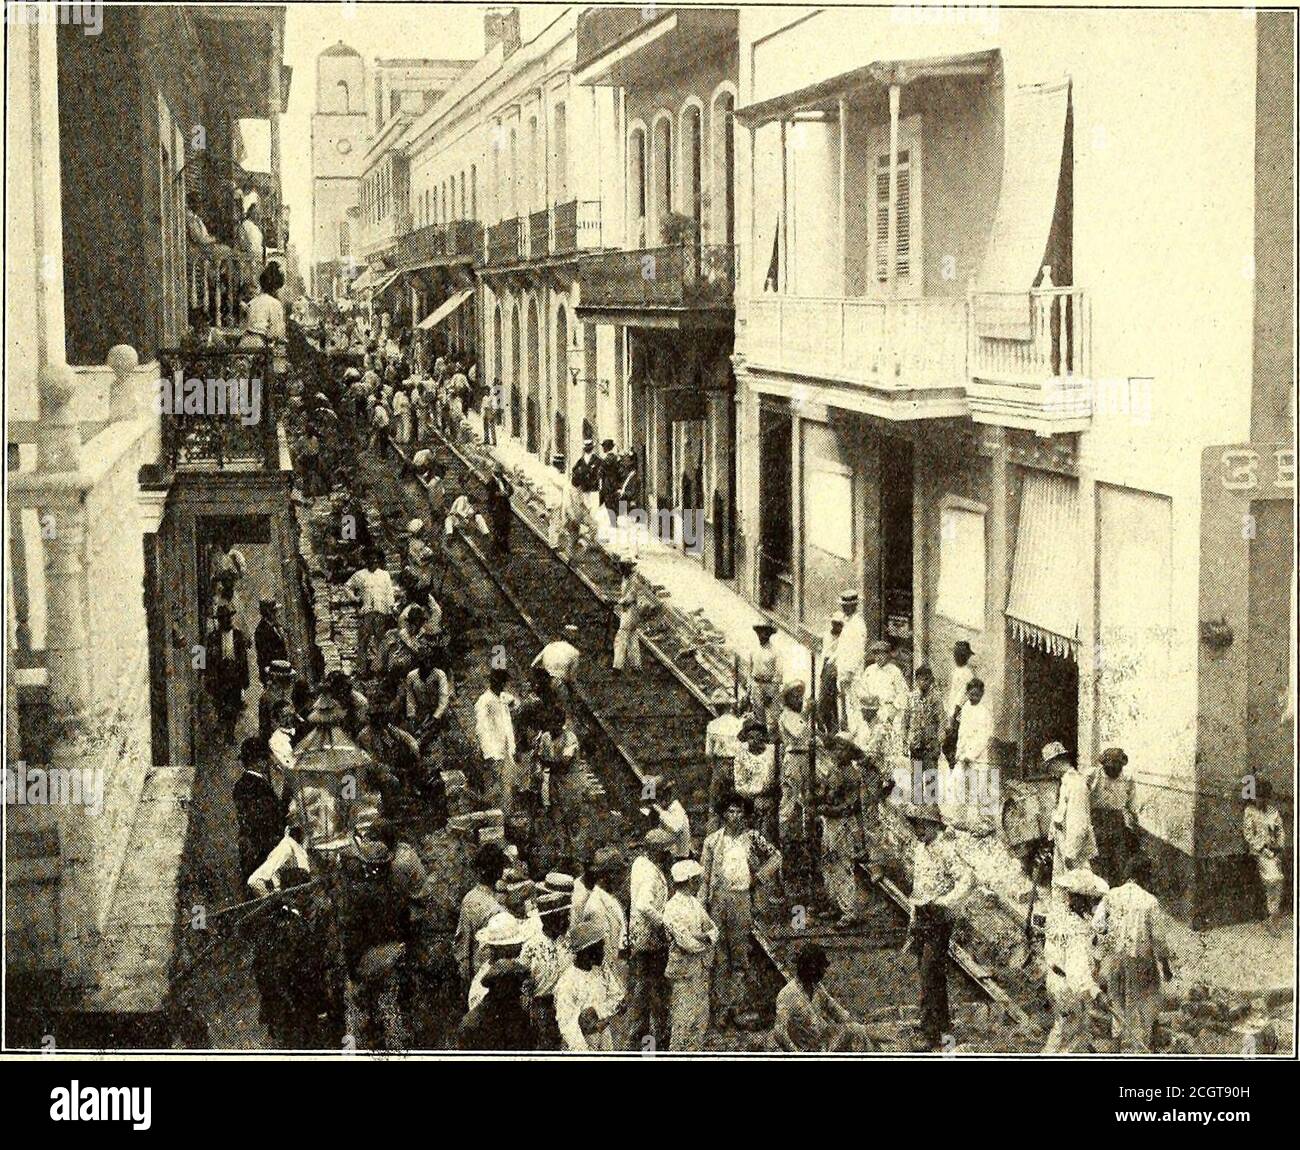 . The Street railway journal . as the new organization iscalled, has at present 9 miles of roadin operation, the main line extendingfrom San Juan through Santurce, tothe town of Rio Piedras, the termi-nus, a distance of 8 miles. There isalso a branch leading to the beautifulParque Borinquen, situated on thenorth beach of the island. The rail-way follows the Caratara, or Spanishmiltary road, along which are manybeautiful residences. At severalpoints, private right of way is used.In San Juan, the railway enters thecity near the sea level and graduallyworks its way through the narrow /streets to Stock Photo